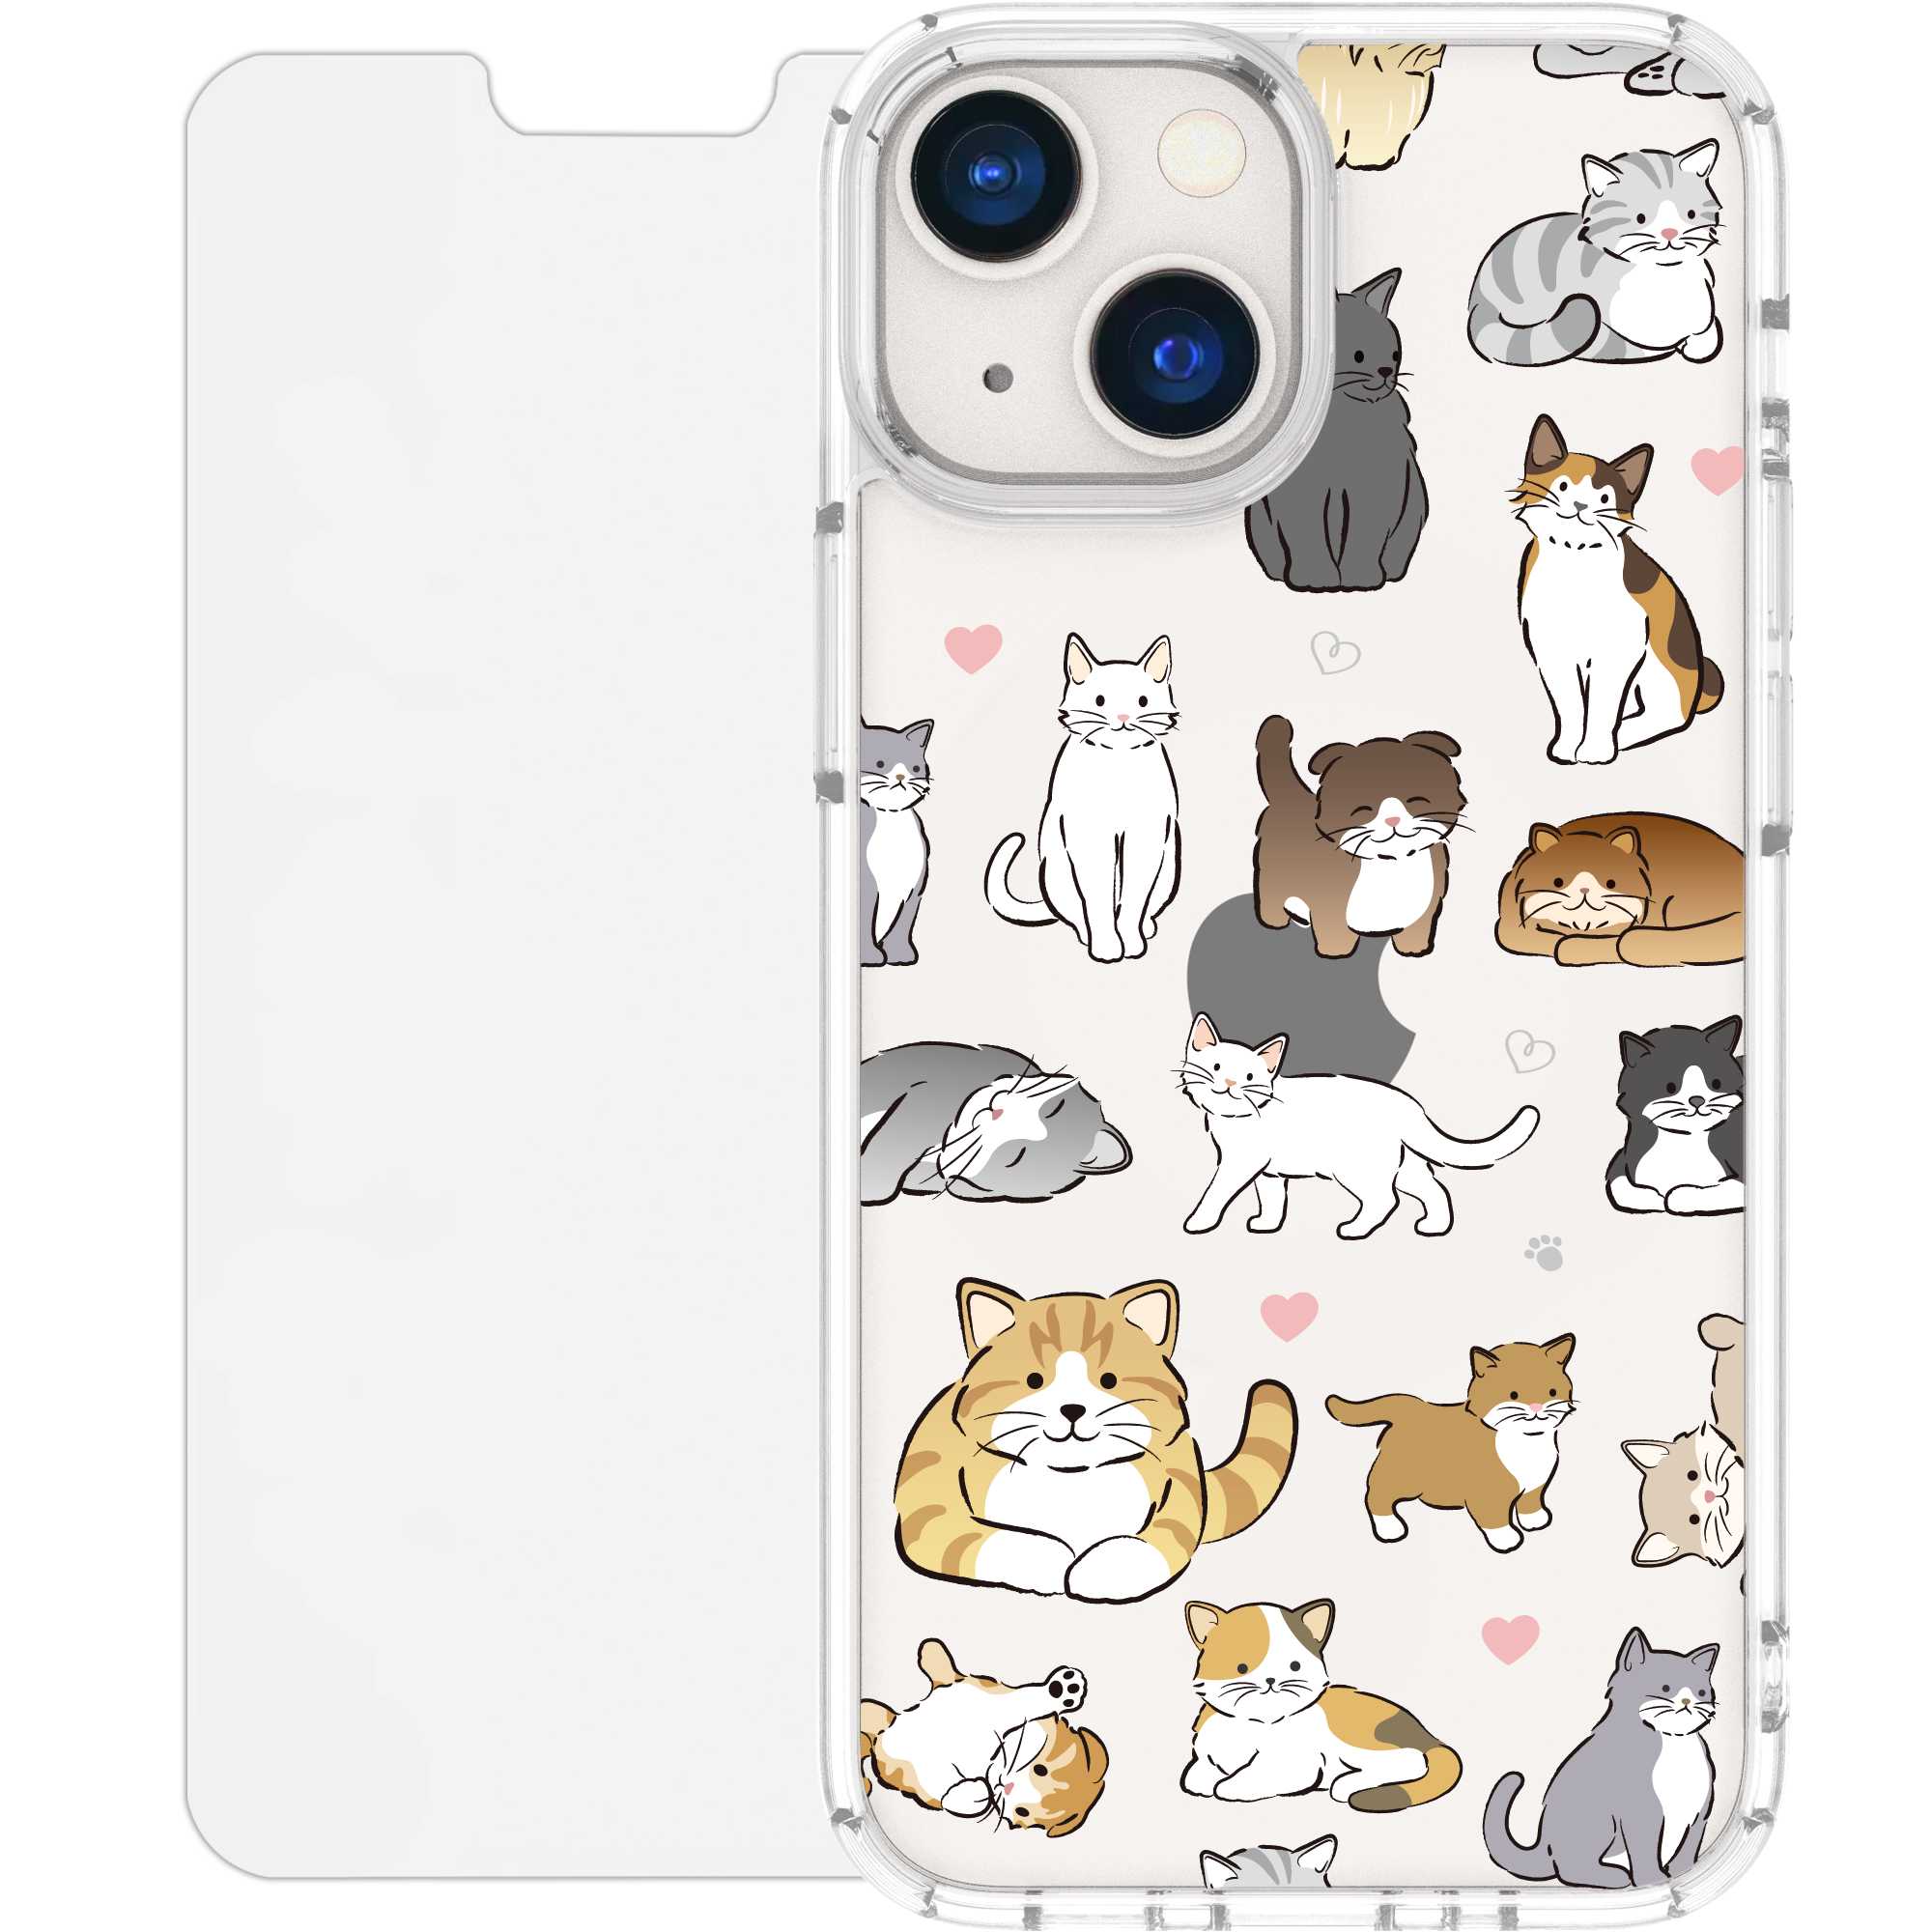 Scooch CrystalCase for iPhone 13 Mini CatParty Scooch CrystalCase